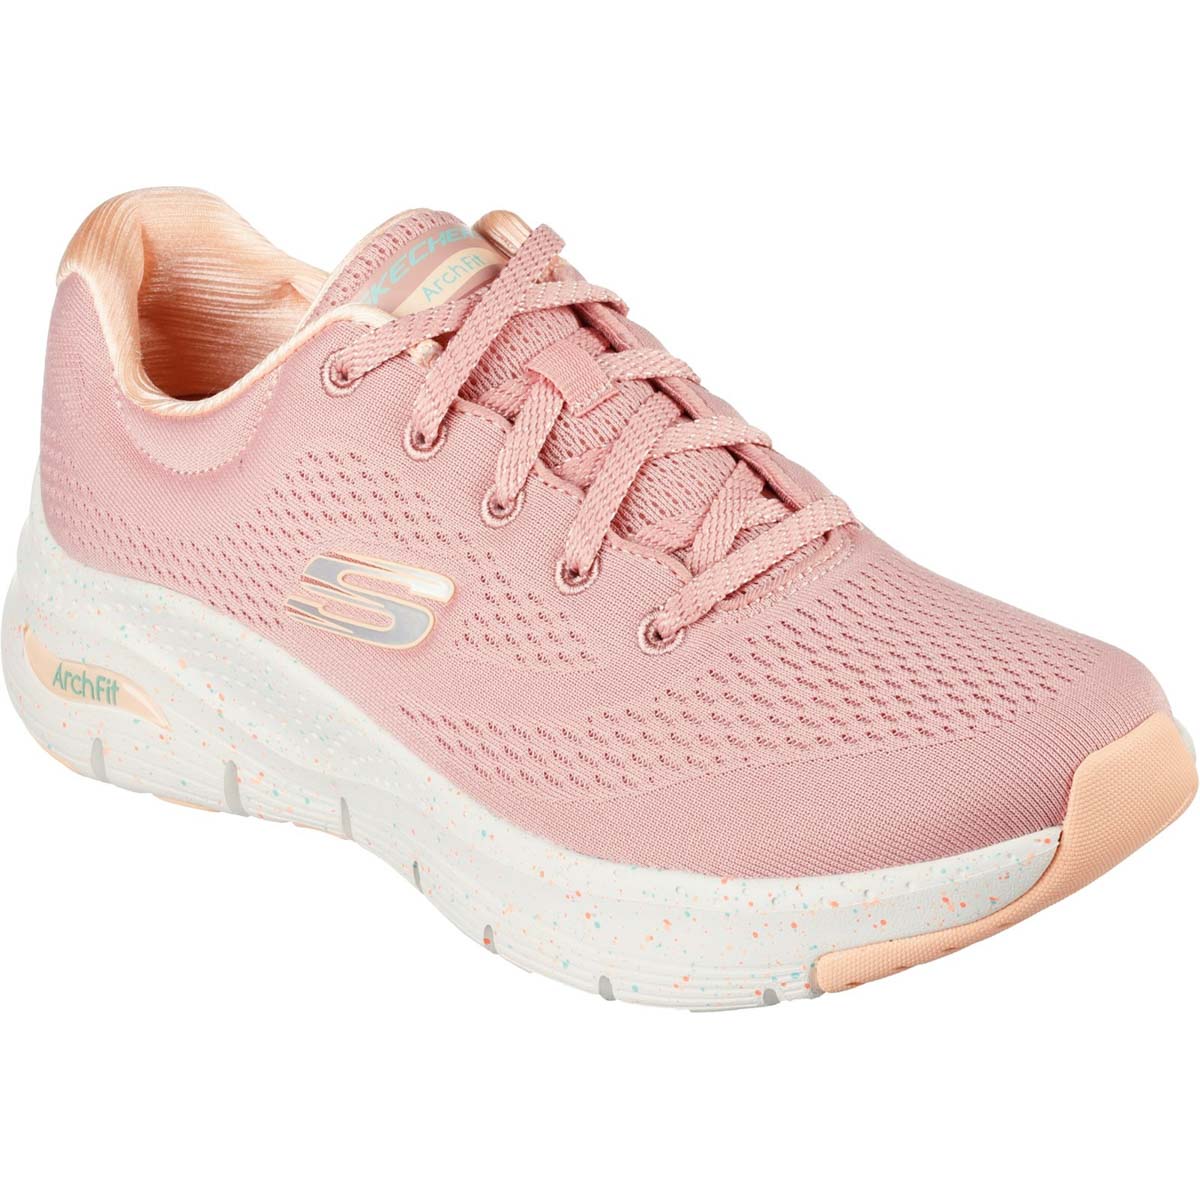 Skechers Arch Fit Freckle Me Pink Womens Trainers 149566 In Size 7 In Plain Pink